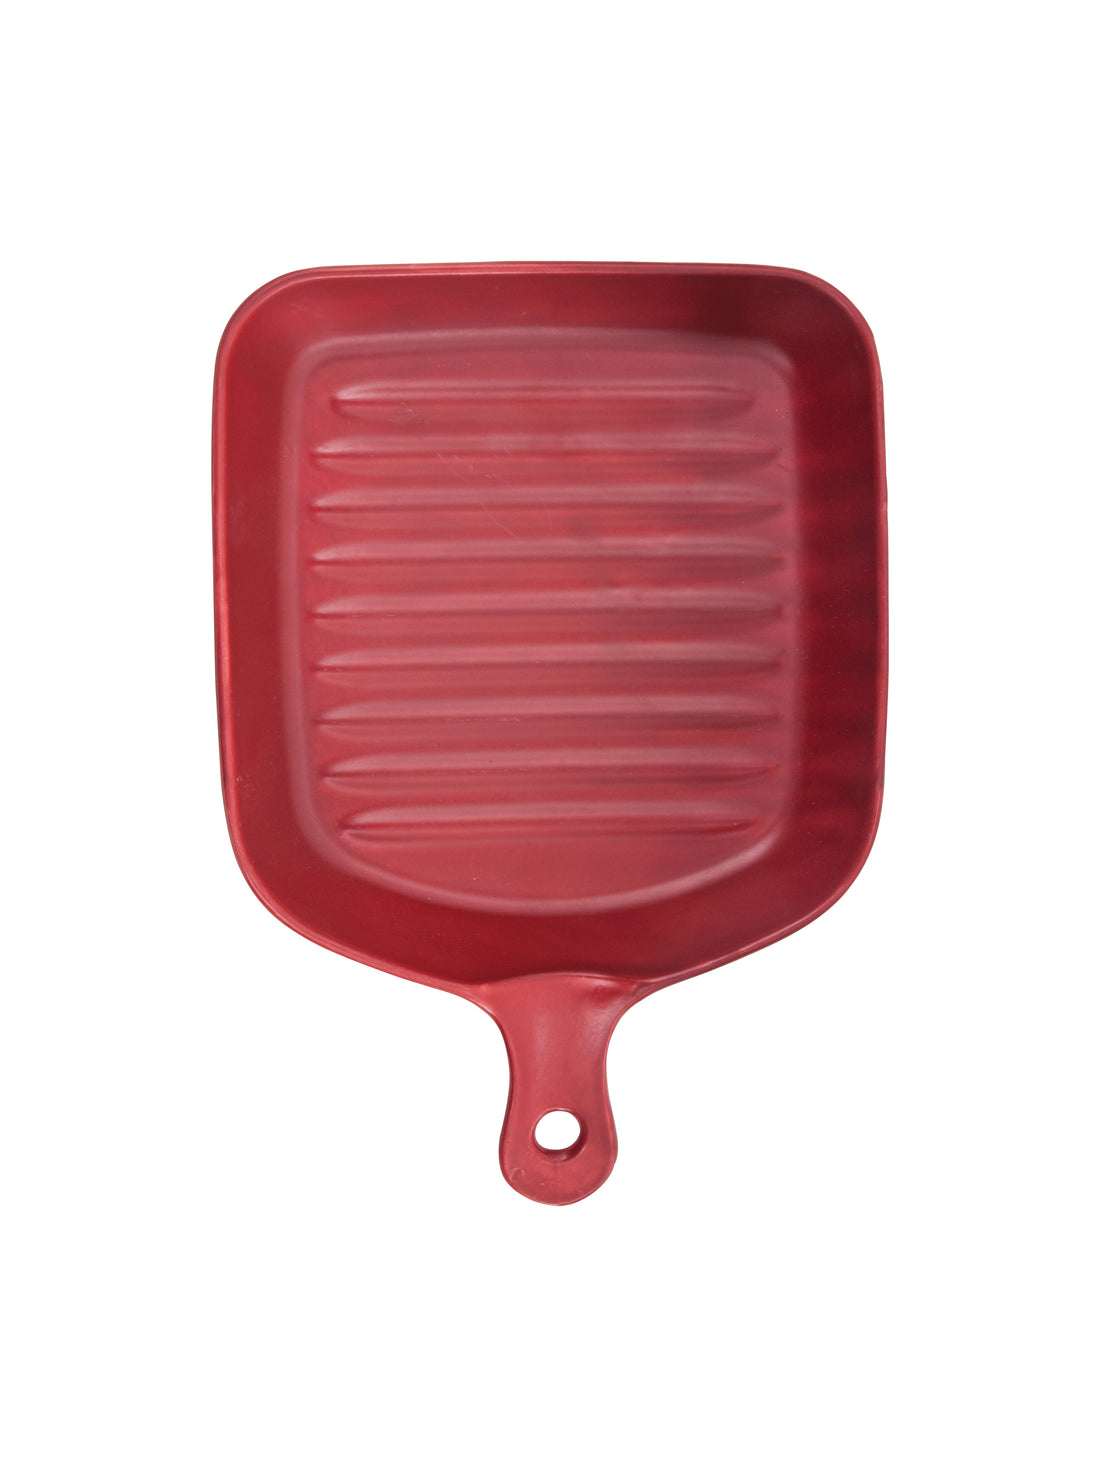 Ceramic Square Grill Plates for Serving Red Color